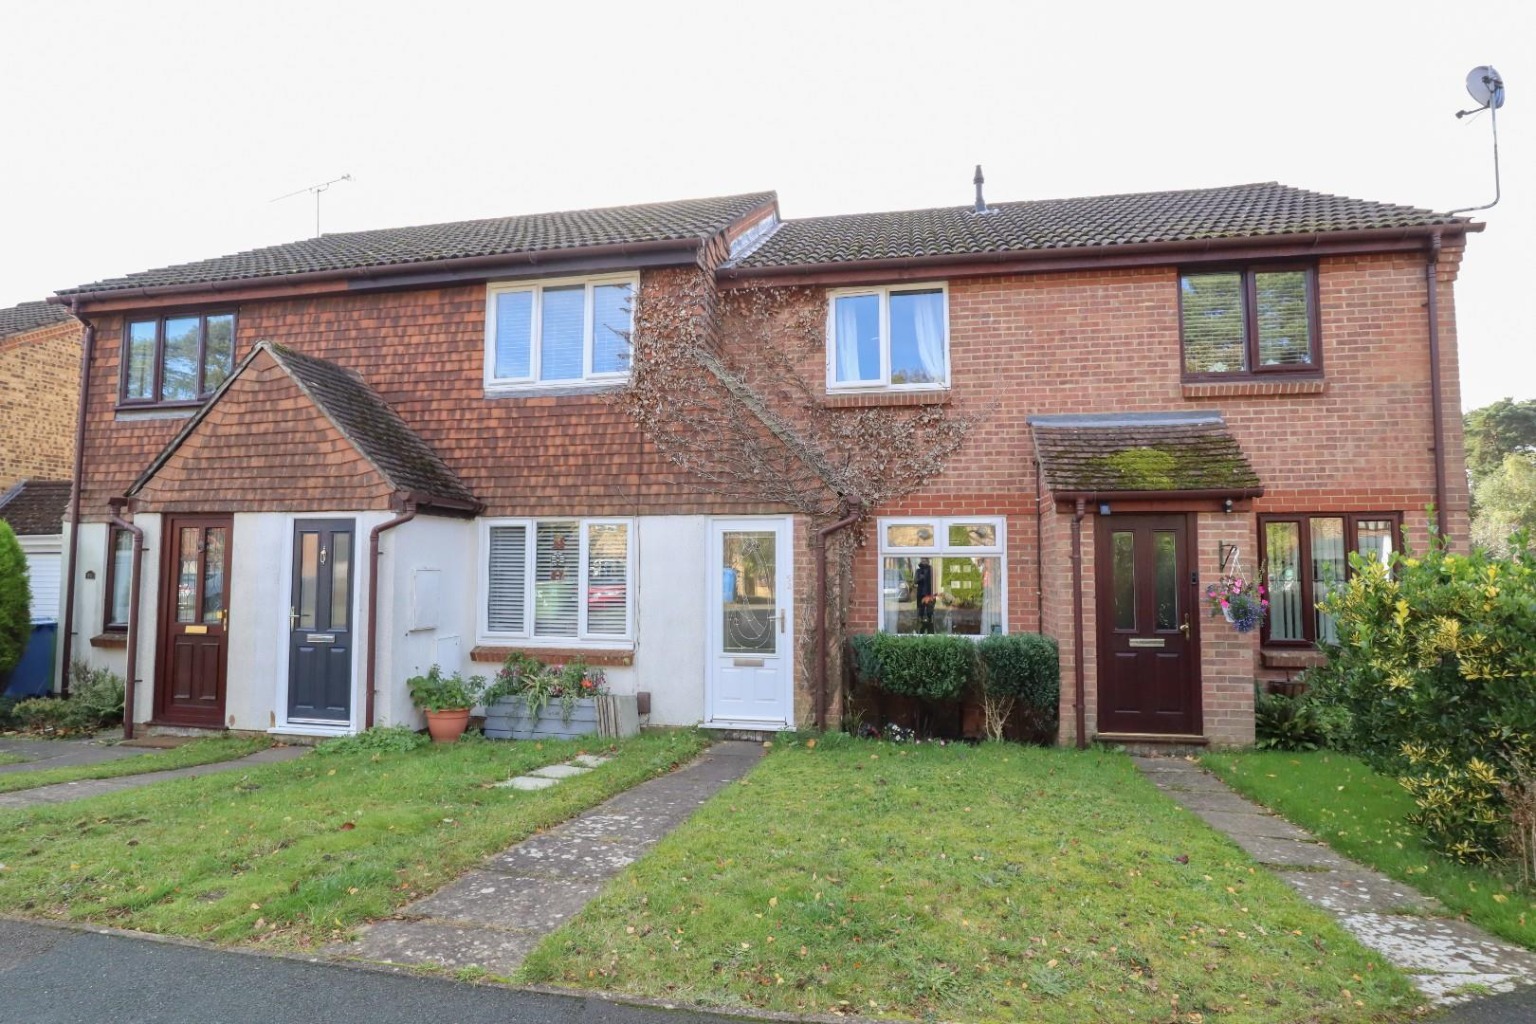 *MARKETED BY CHRIS GRAY*  This two bedroom terraced home is nestled towards the end of a cul-de-sac on the ever popular Forest Park in Bracknell.  There is a living room which opens through to the kitchen, which then leads to a conservatory and then through to the south facing rear garden.